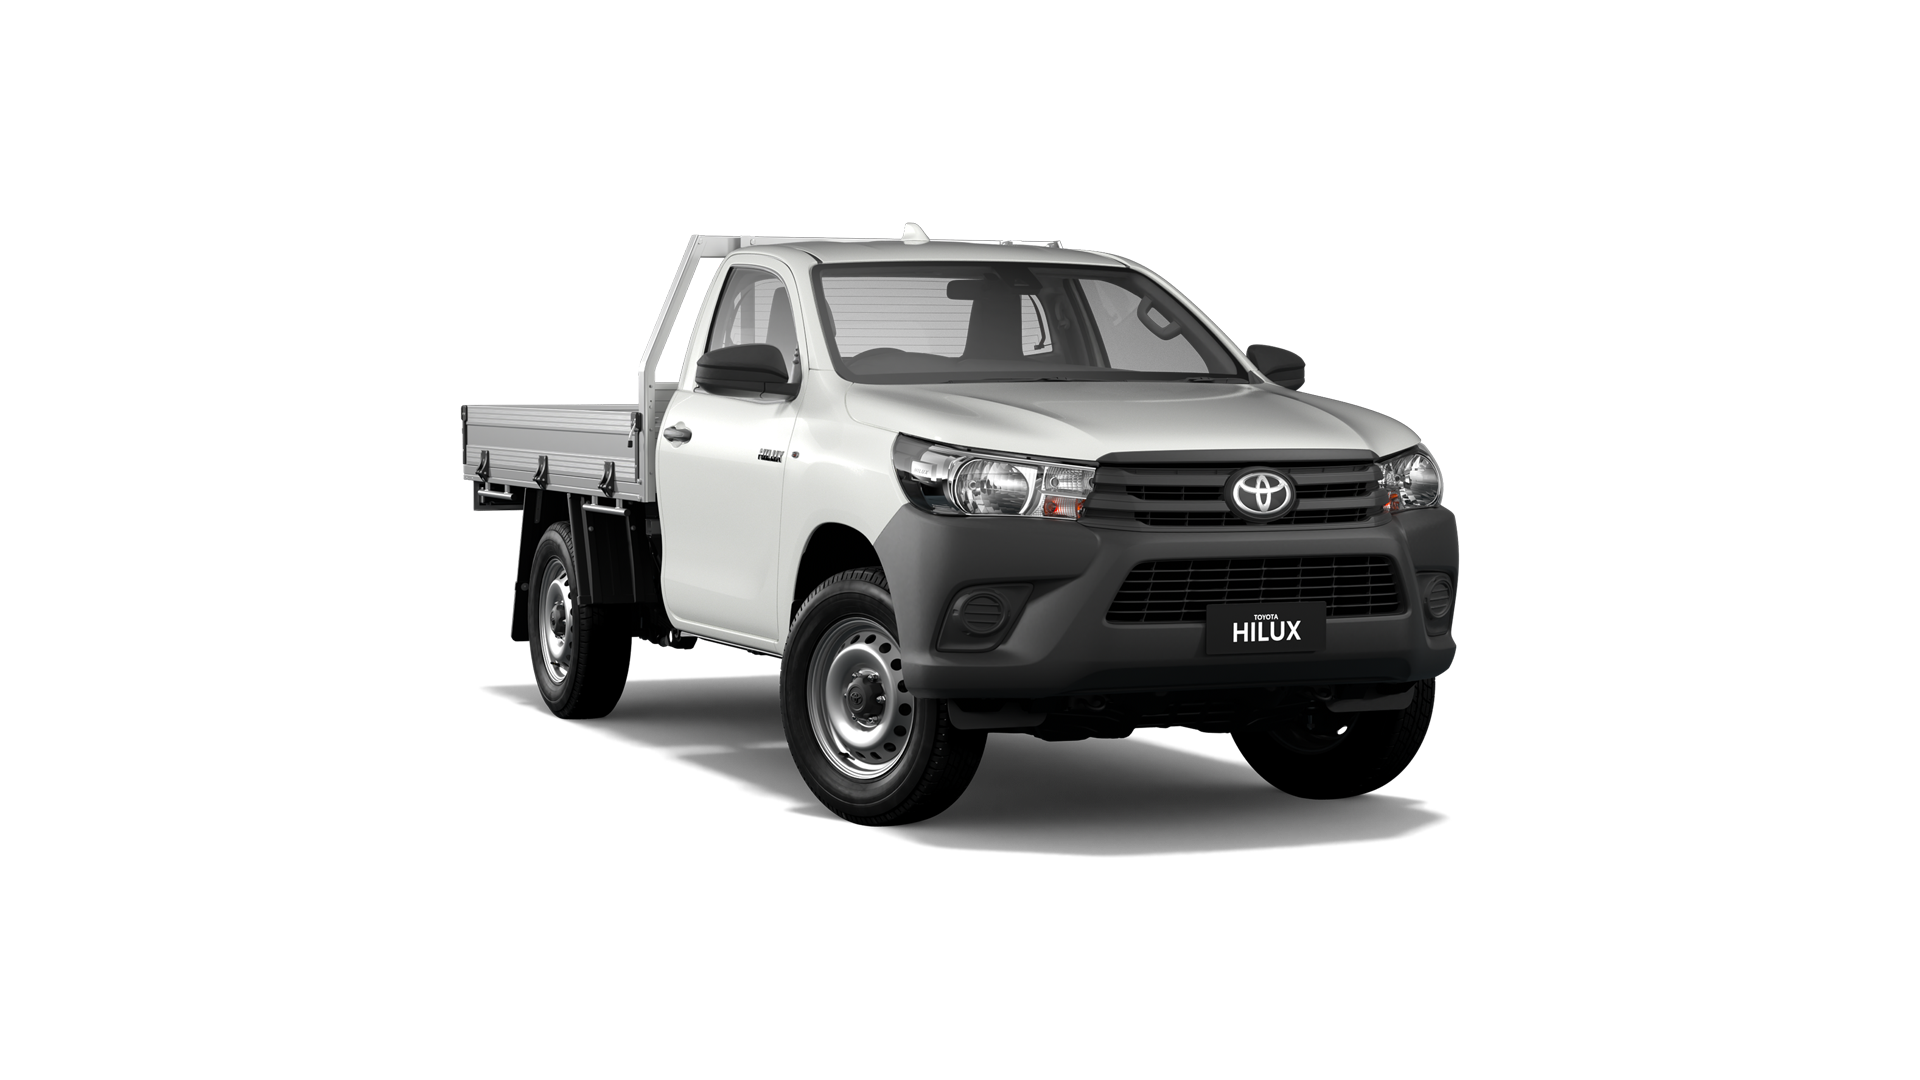 HiLux 4x2 WorkMate